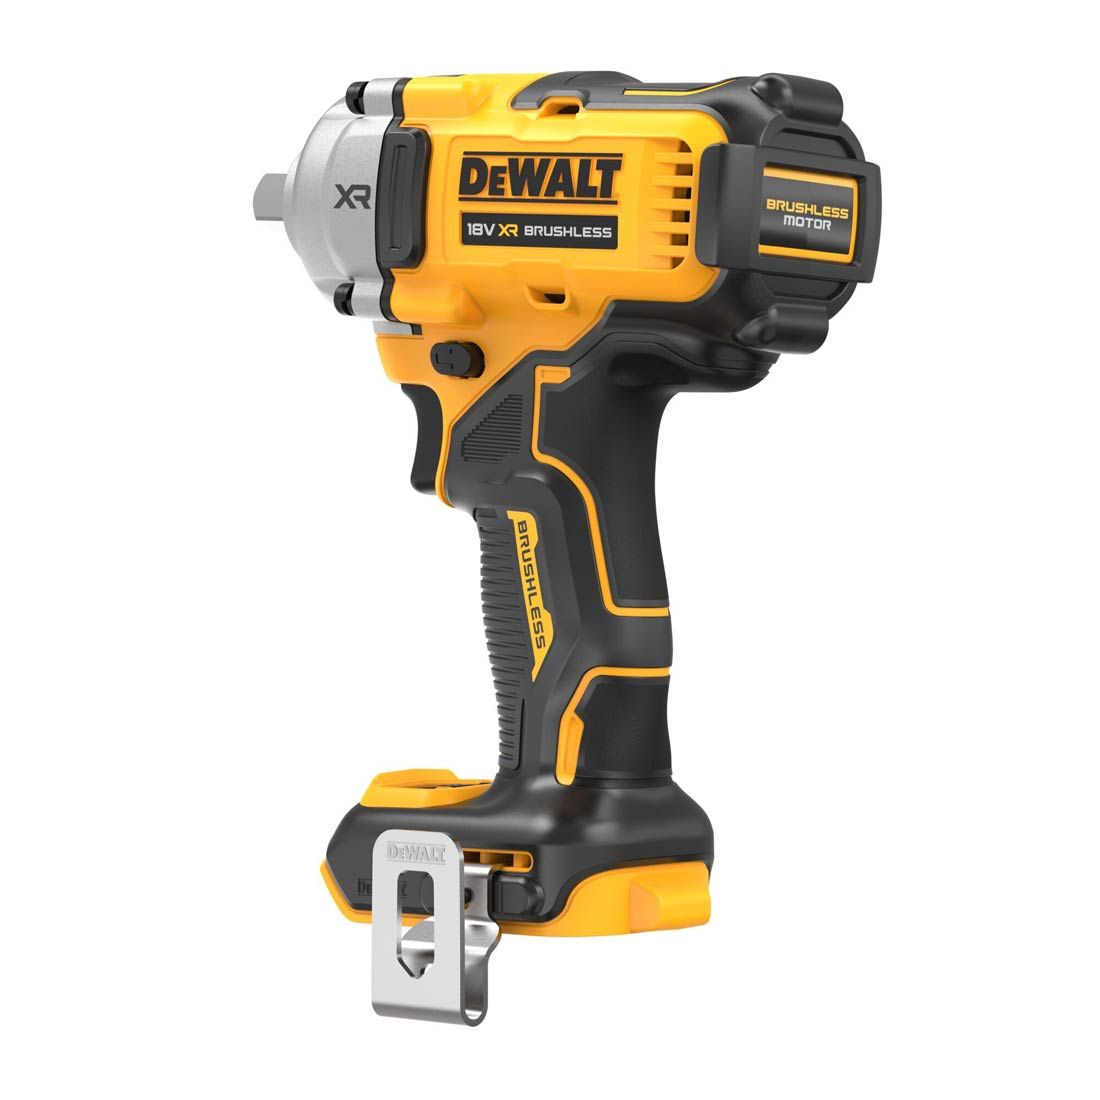 Dewalt DCF892N 18V Brushless 1/2 Compact High Torque Wrench Body Only